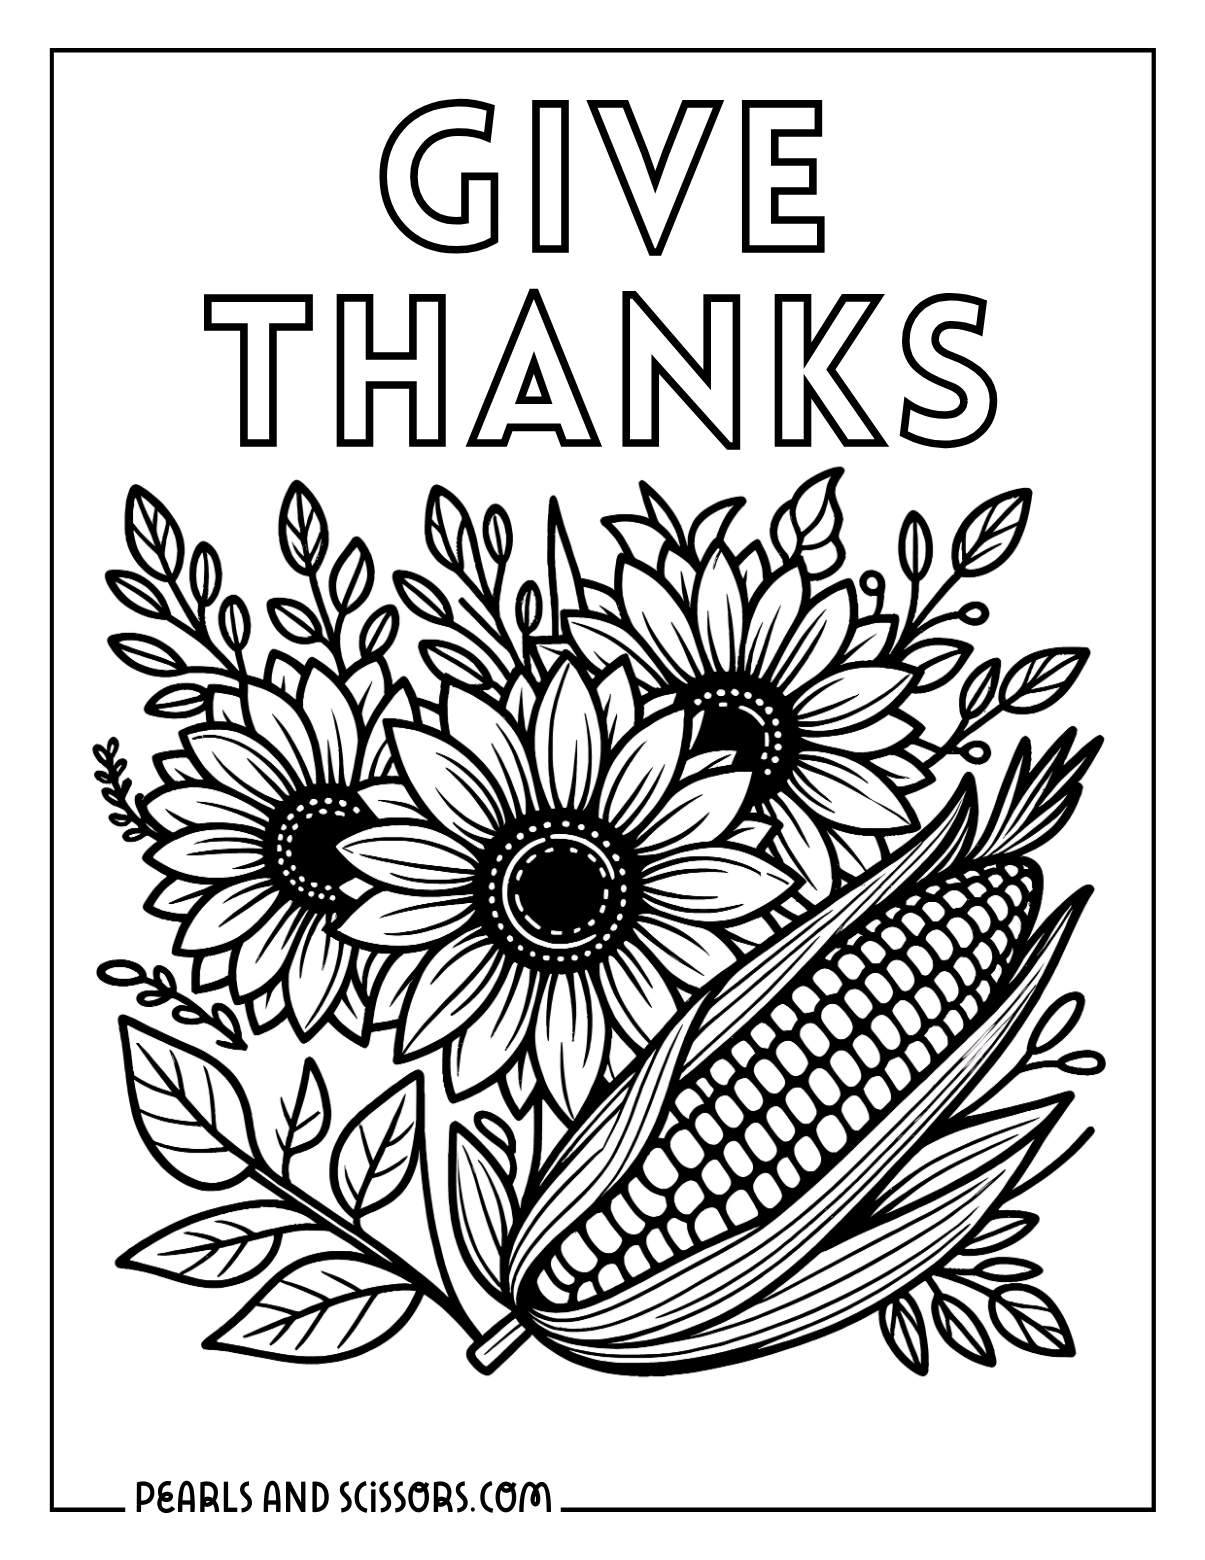 Give thanks sunflower and sweet corn thanksgiving coloring page.